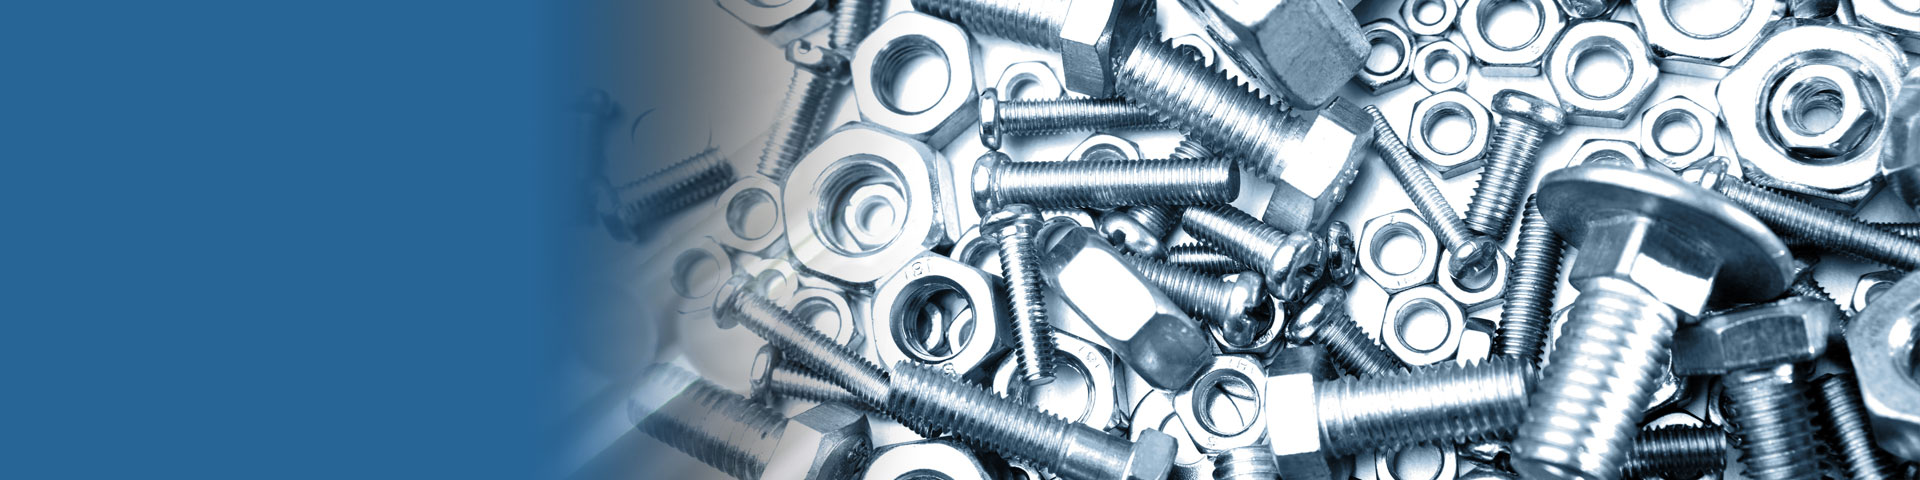 304L Stainless Steel Fasteners